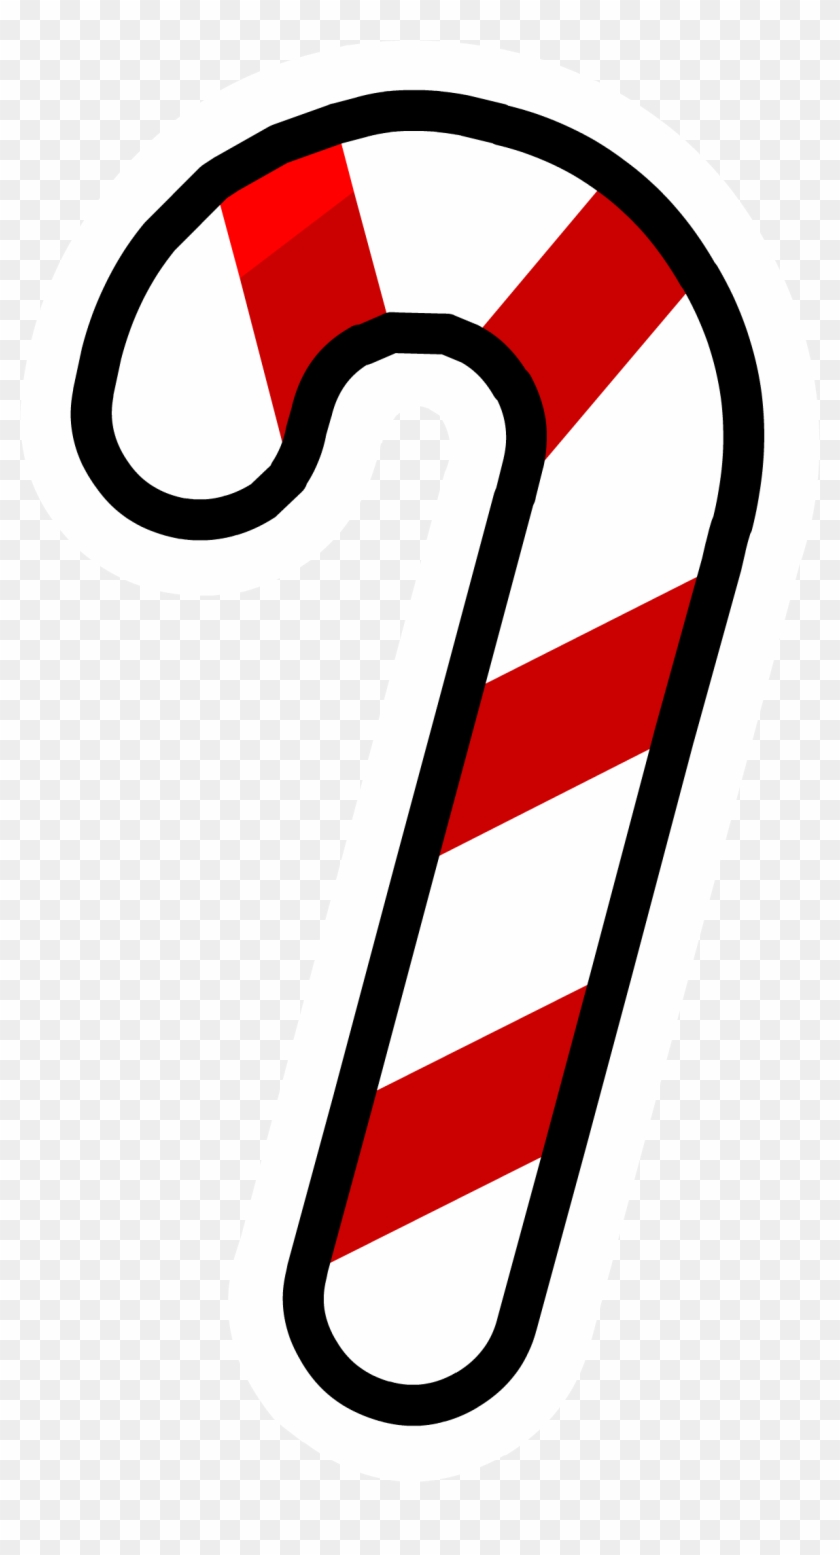 Candy Cane Clipart Transparent - Candy Canes #39979